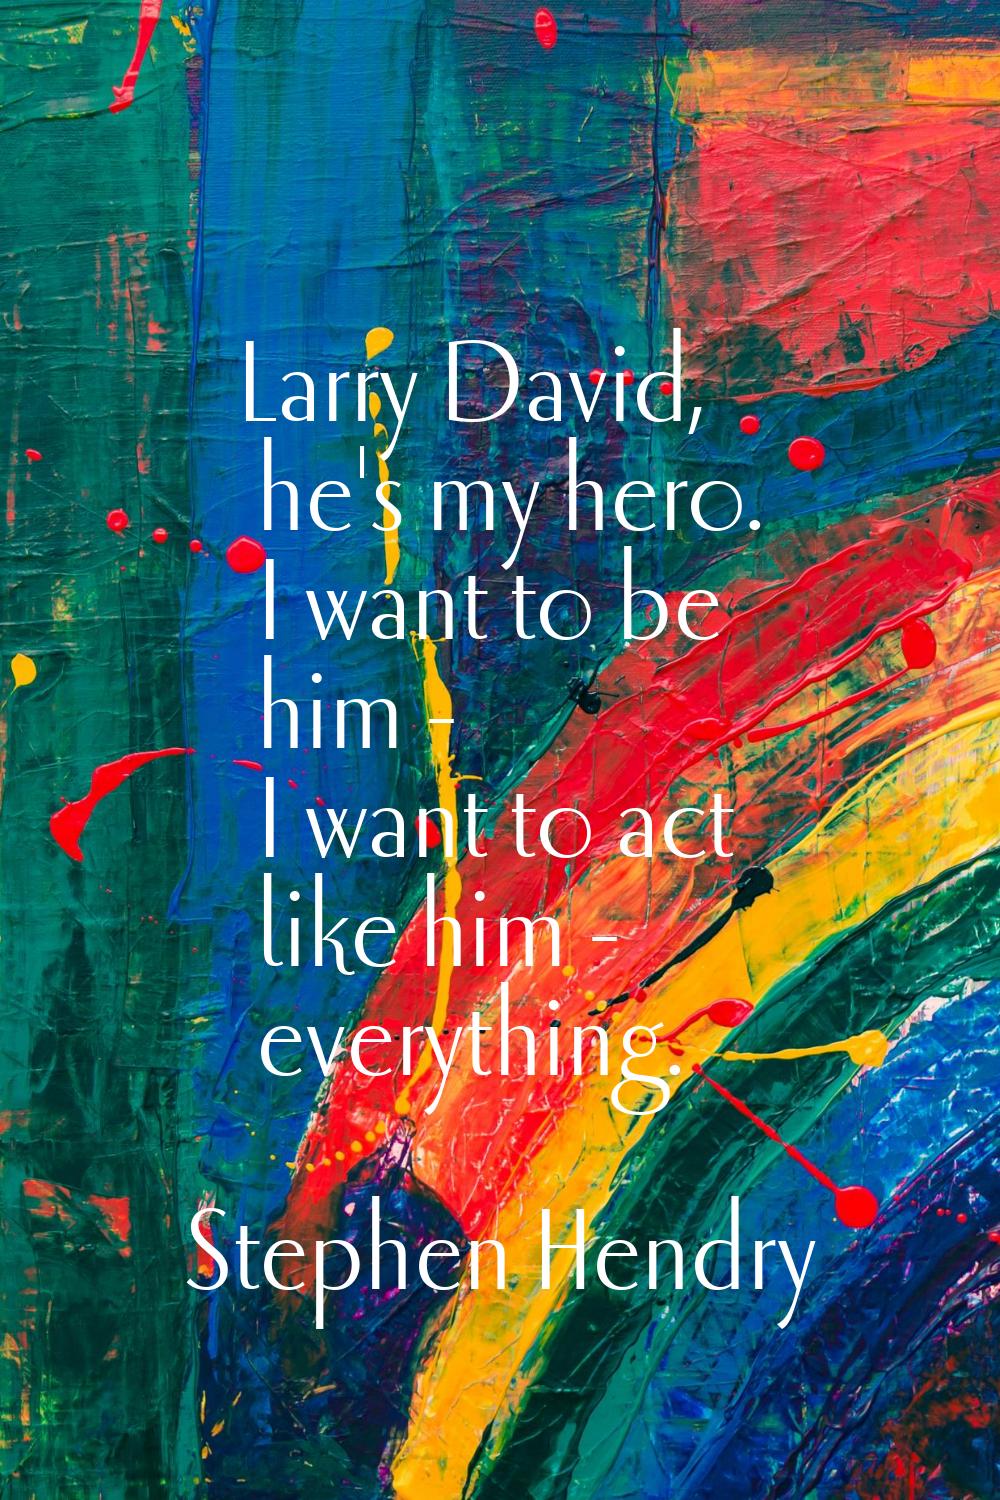 Larry David, he's my hero. I want to be him - I want to act like him - everything.